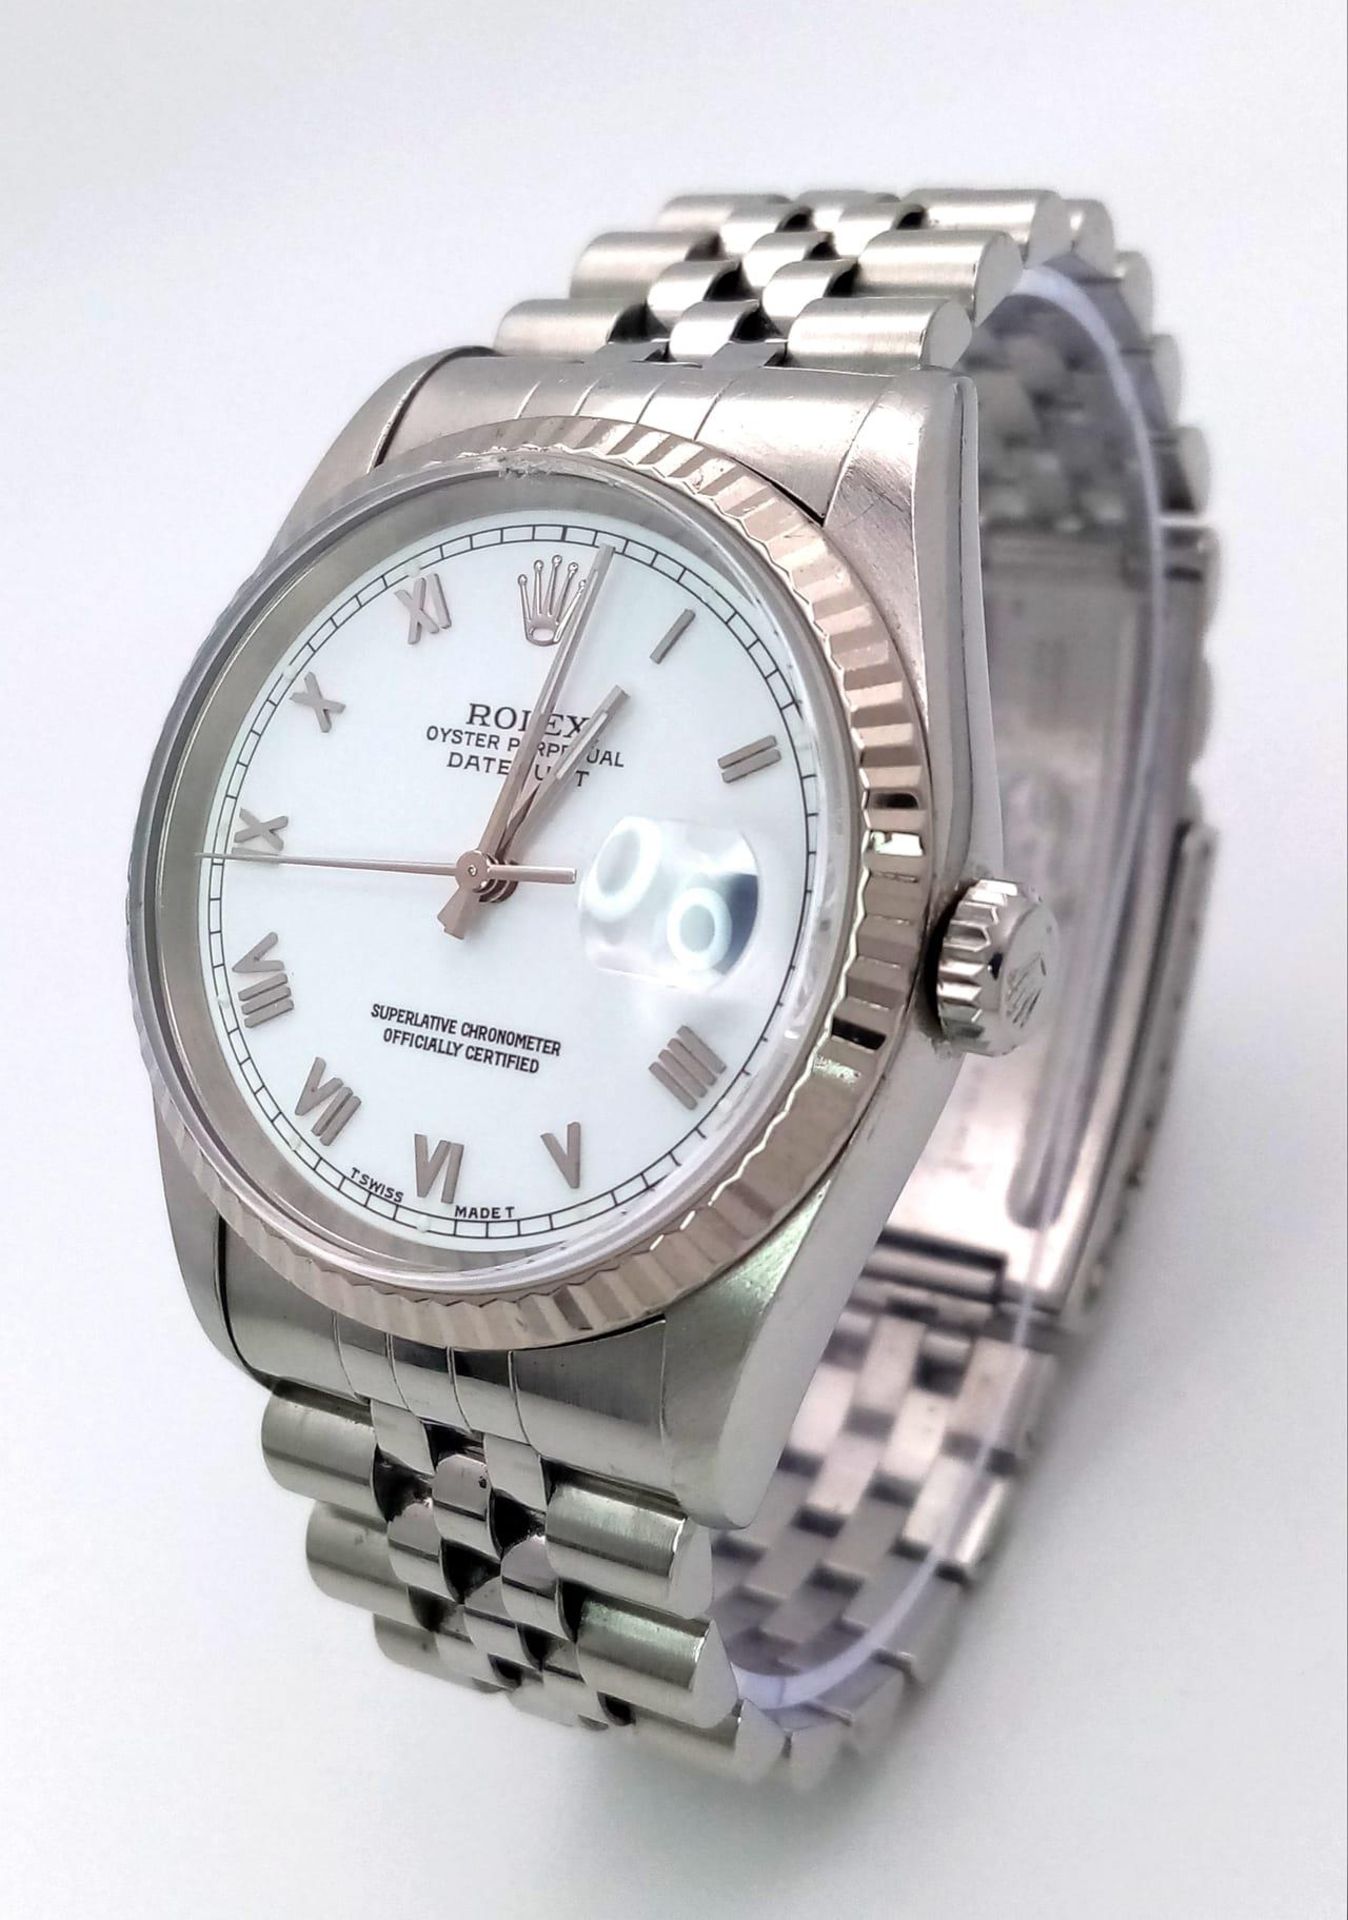 A GENTS ROLEX OYSTER PERPETUAL DATEJUST WATCH IN STAINLESS STEEL WITH WHITE DIAL , ROMAN NUMERALS